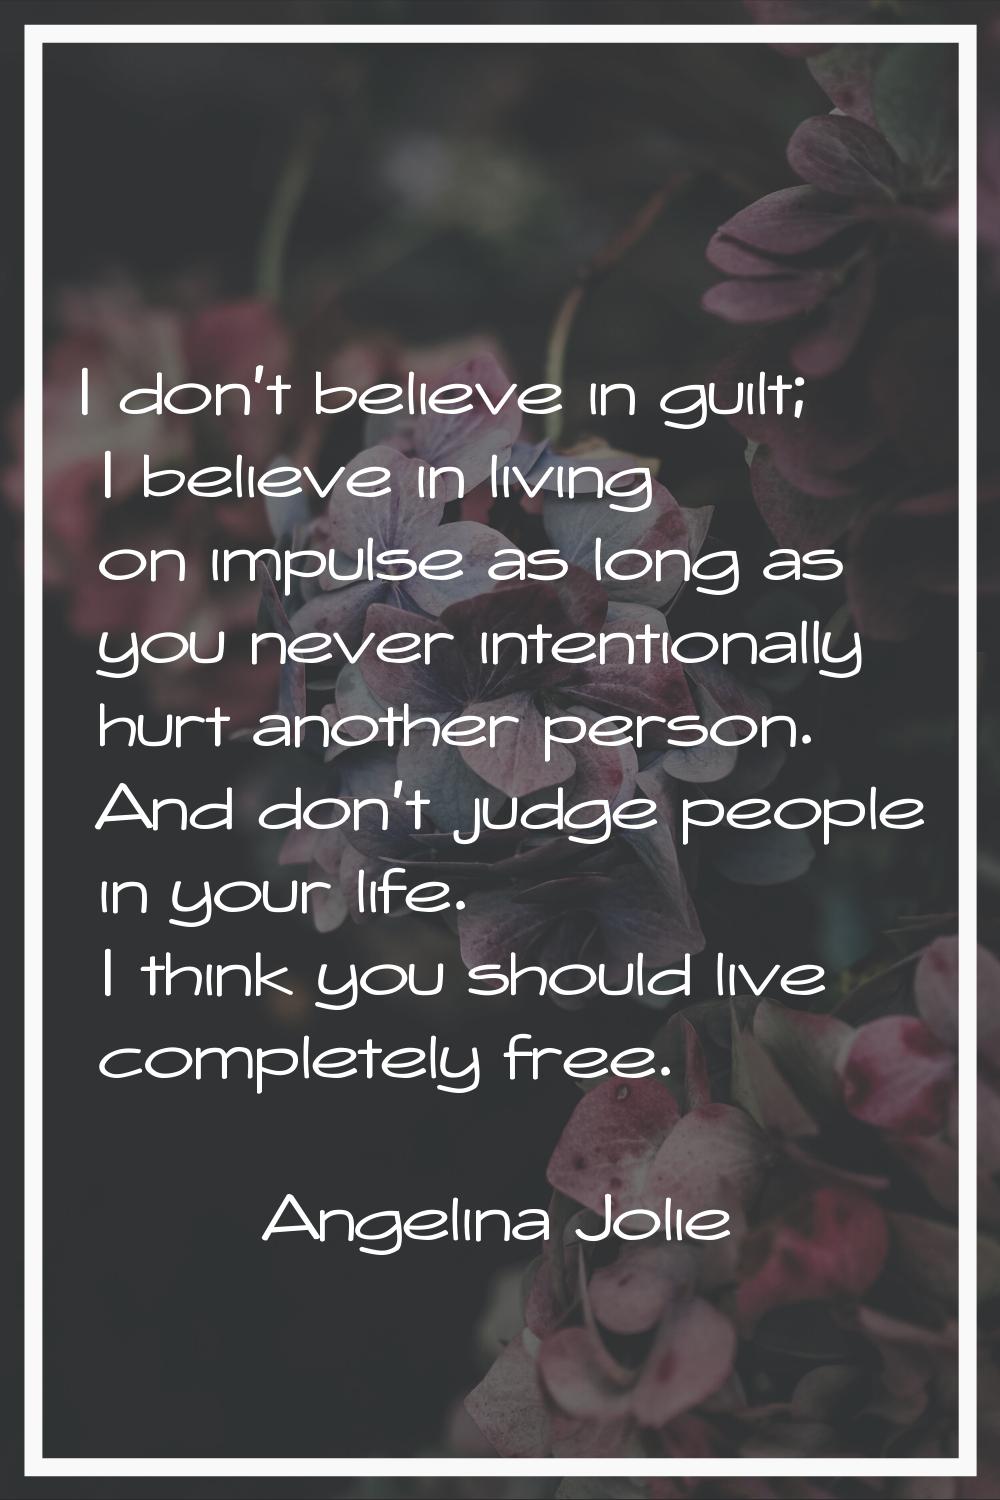 I don't believe in guilt; I believe in living on impulse as long as you never intentionally hurt an